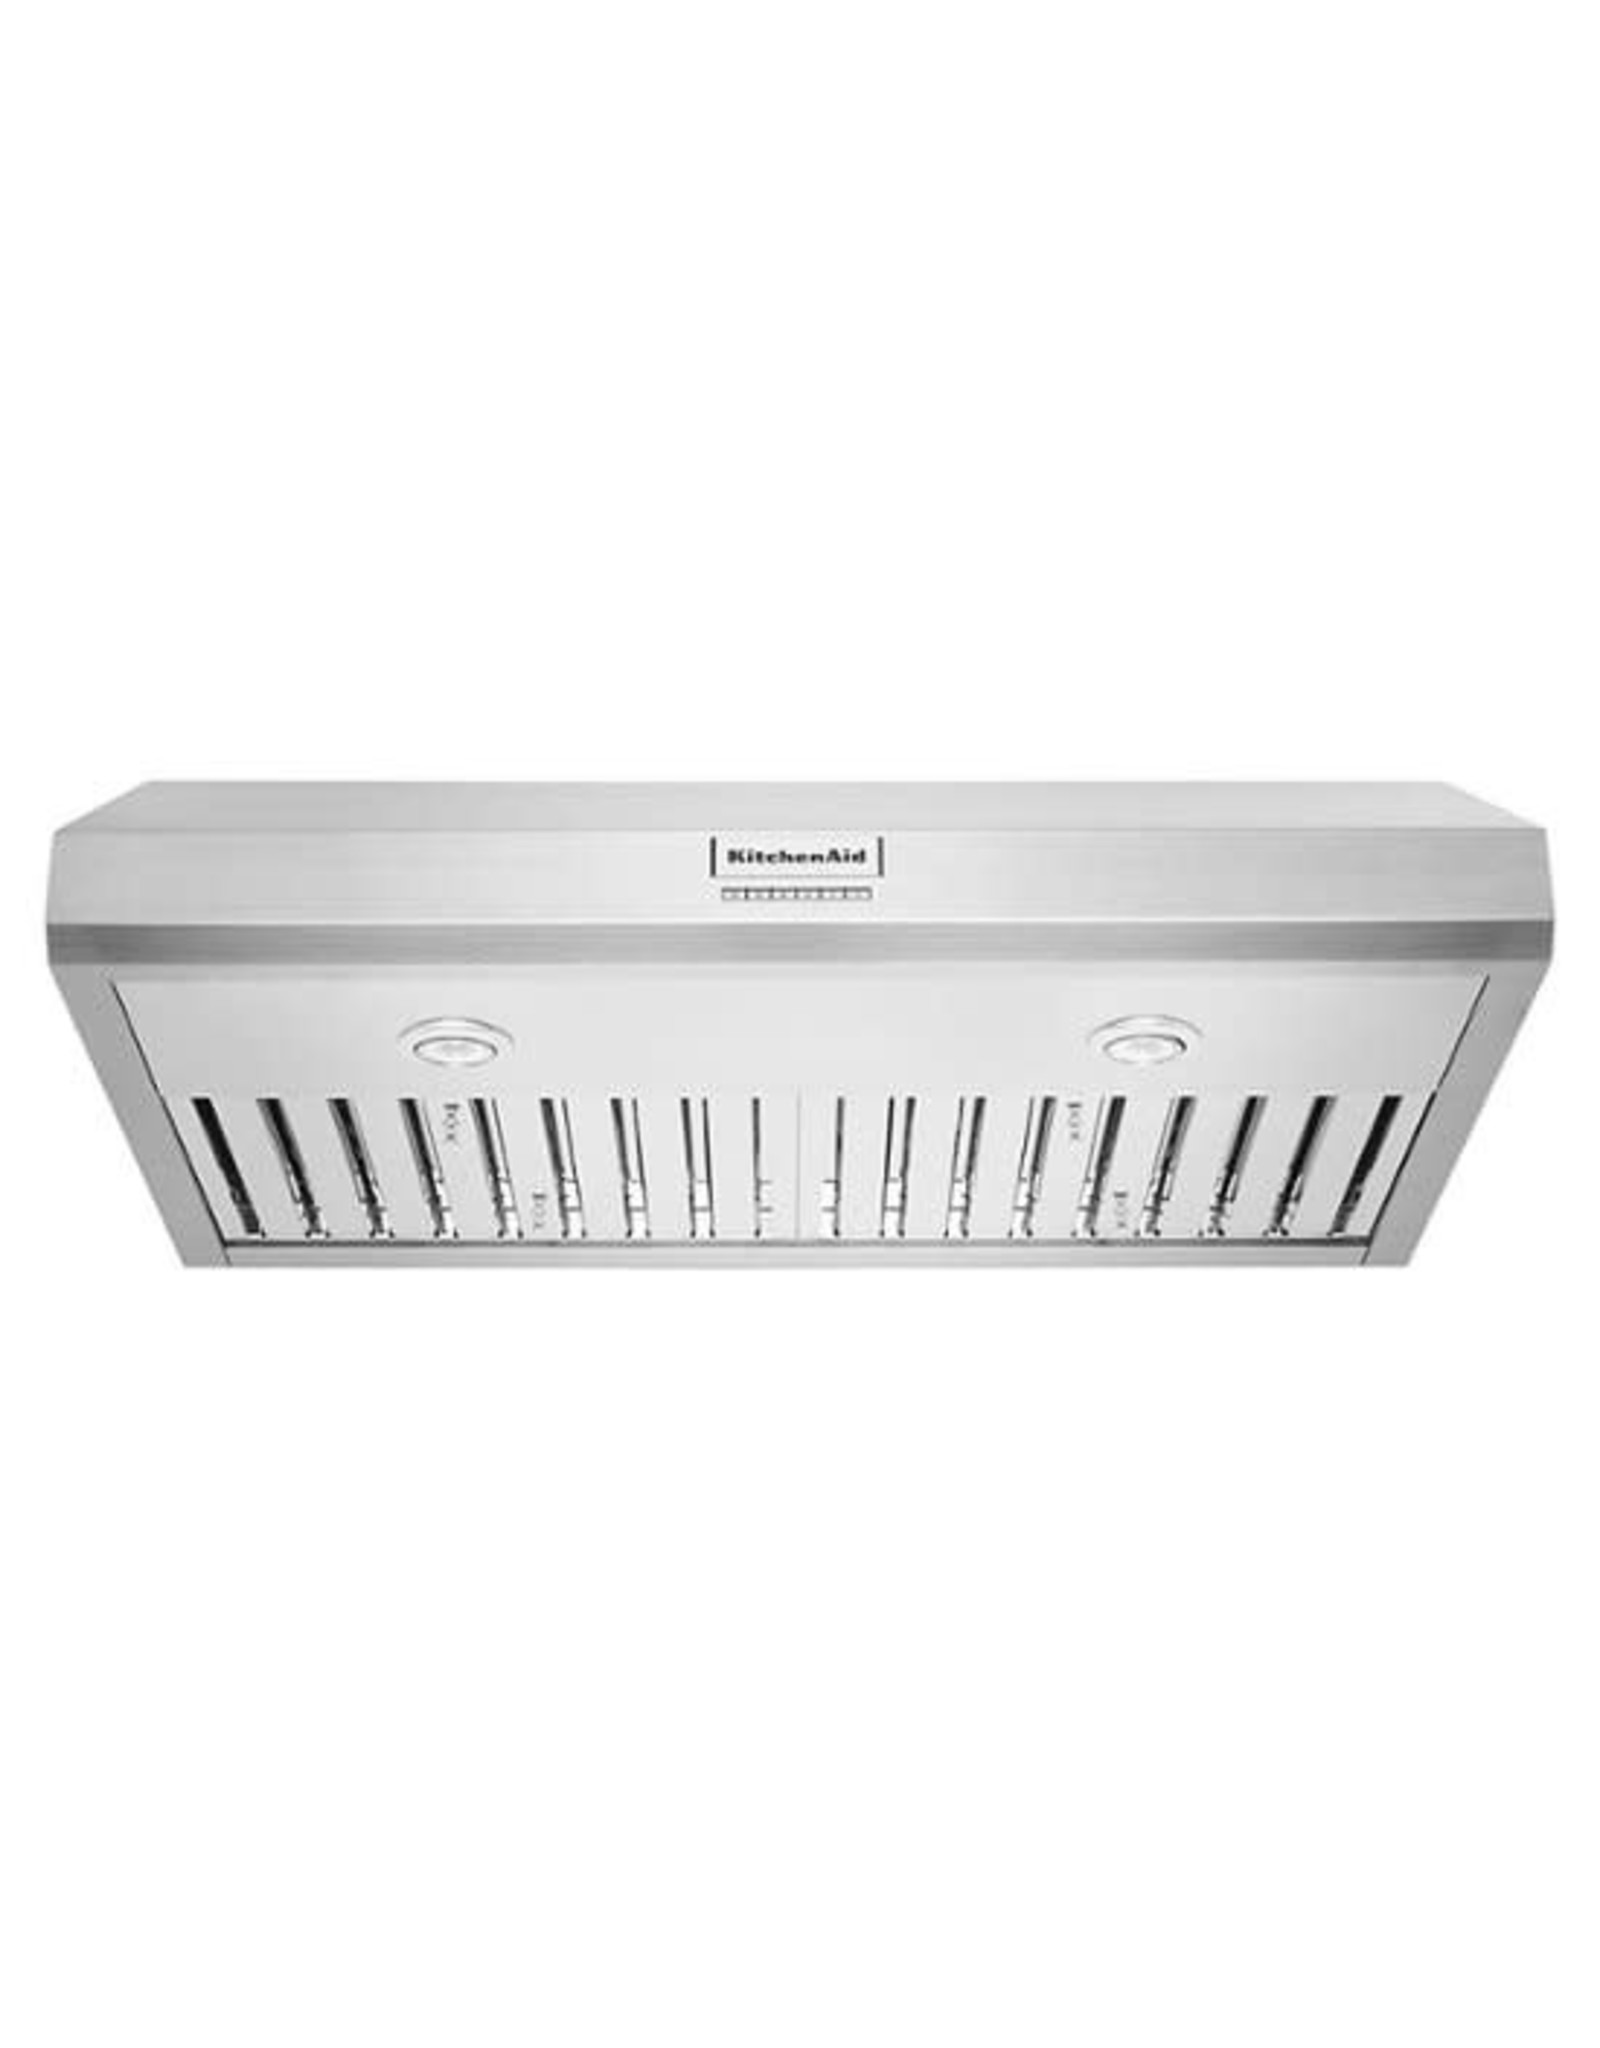 KVUC606KSS 36 in. 585 CFM Motor Class Commercial-Style Under-Cabinet Range Hood System with light in Stainless Steel